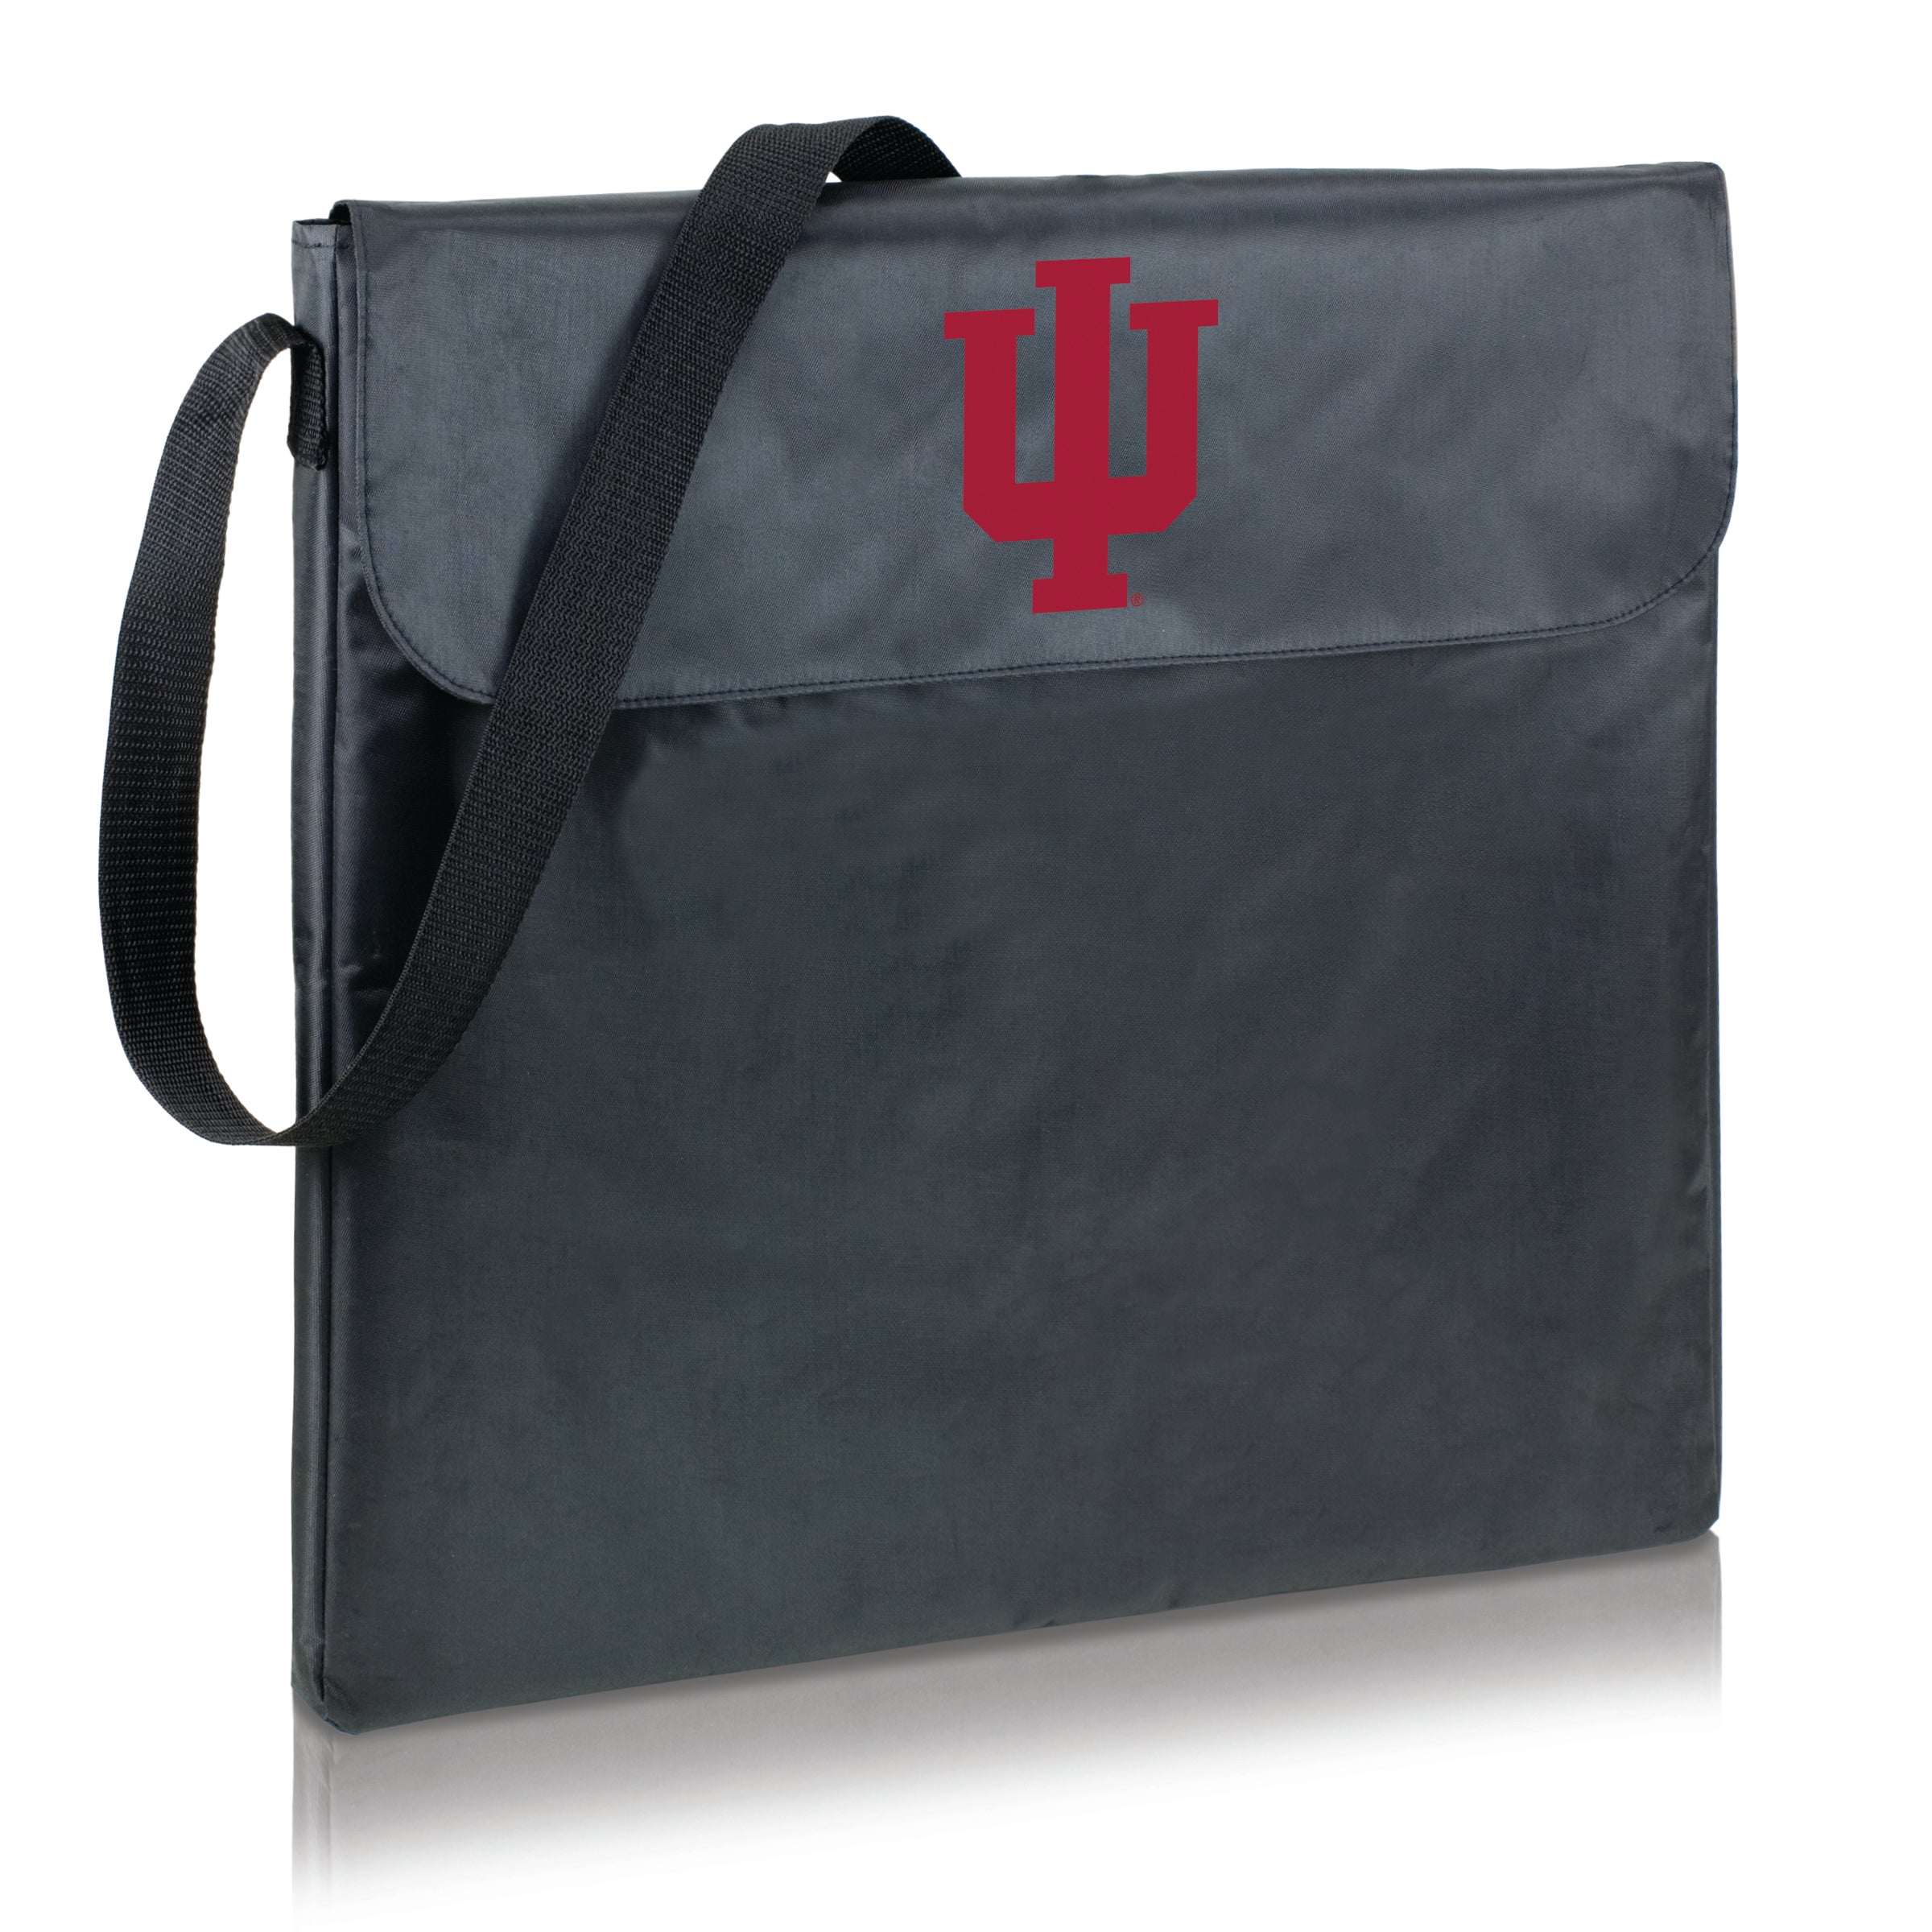 Indiana Hoosiers - X-Grill Portable Charcoal BBQ Grill